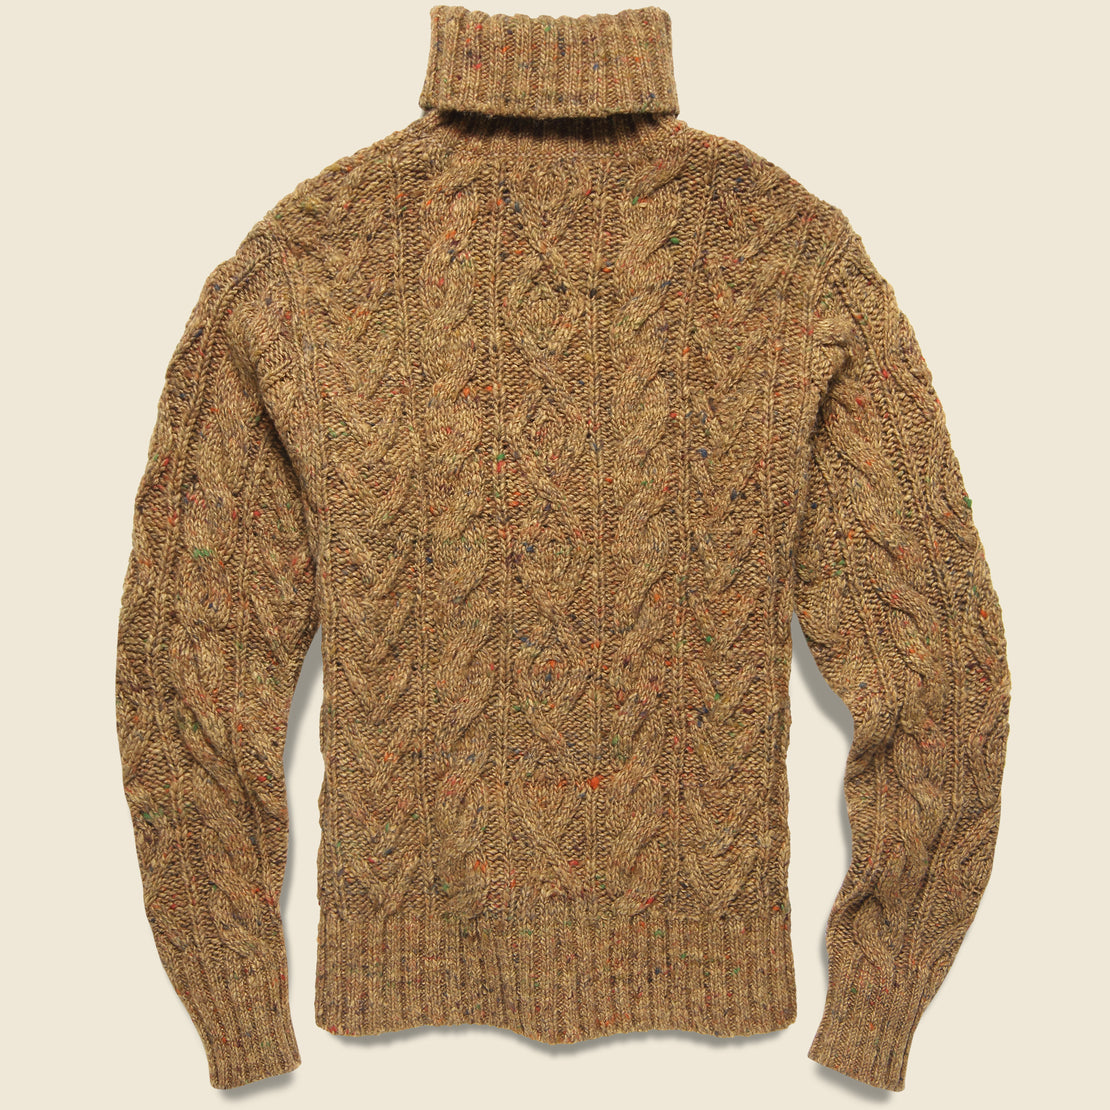 Cable Turtleneck - Tan Donegal/Multi - RRL - STAG Provisions - Tops - Sweater